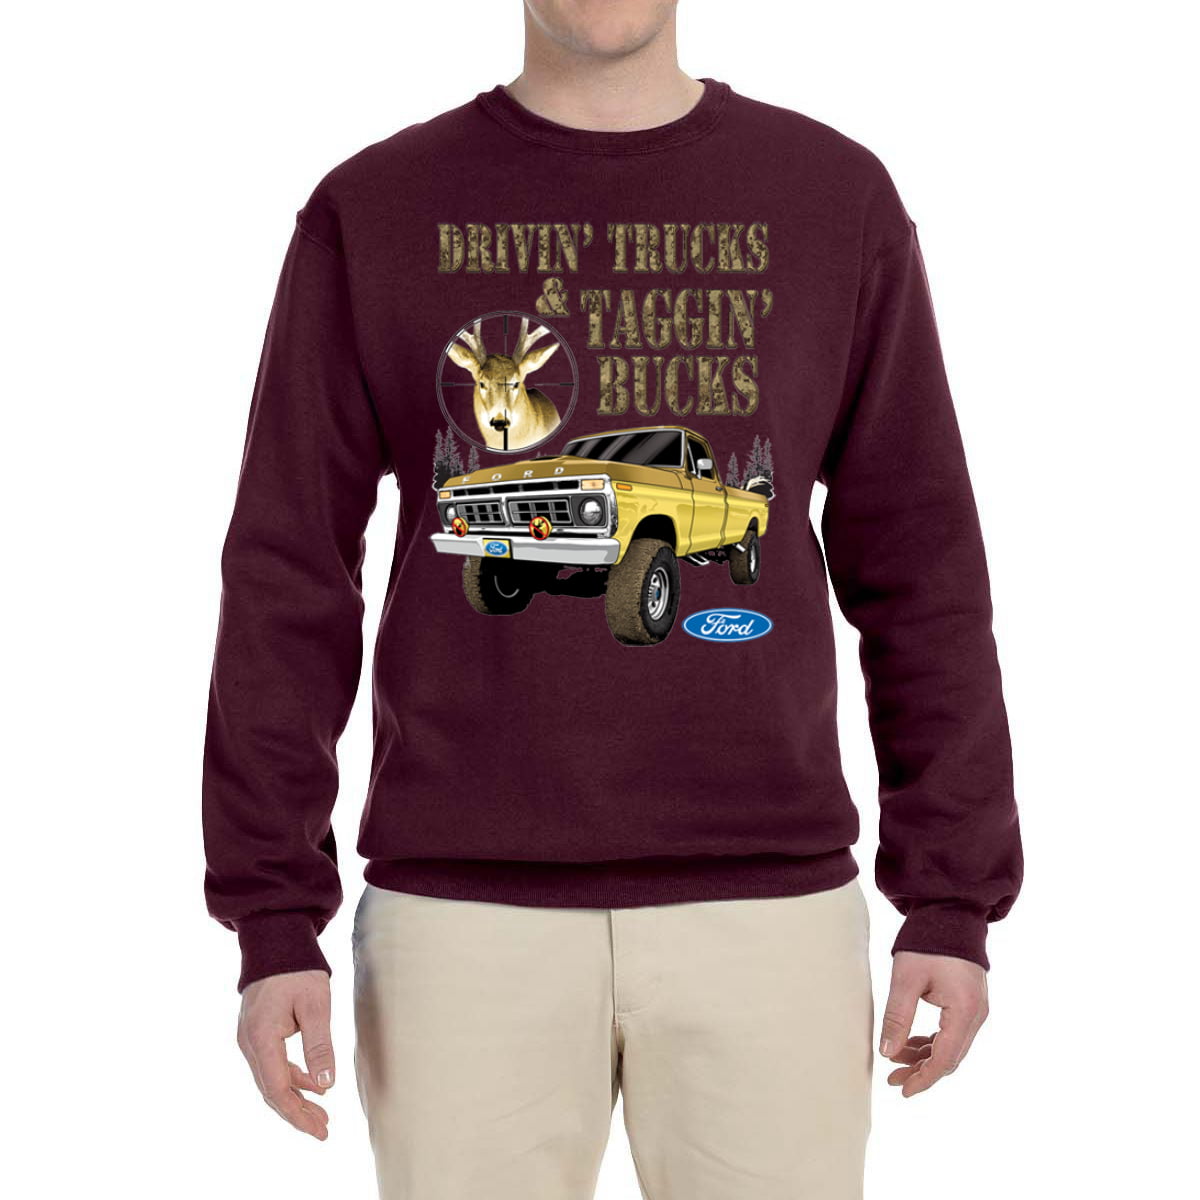 Built Tough Crew Neck Sweatshirt Licensed Ford Truck 4x4 F150 Mustang 